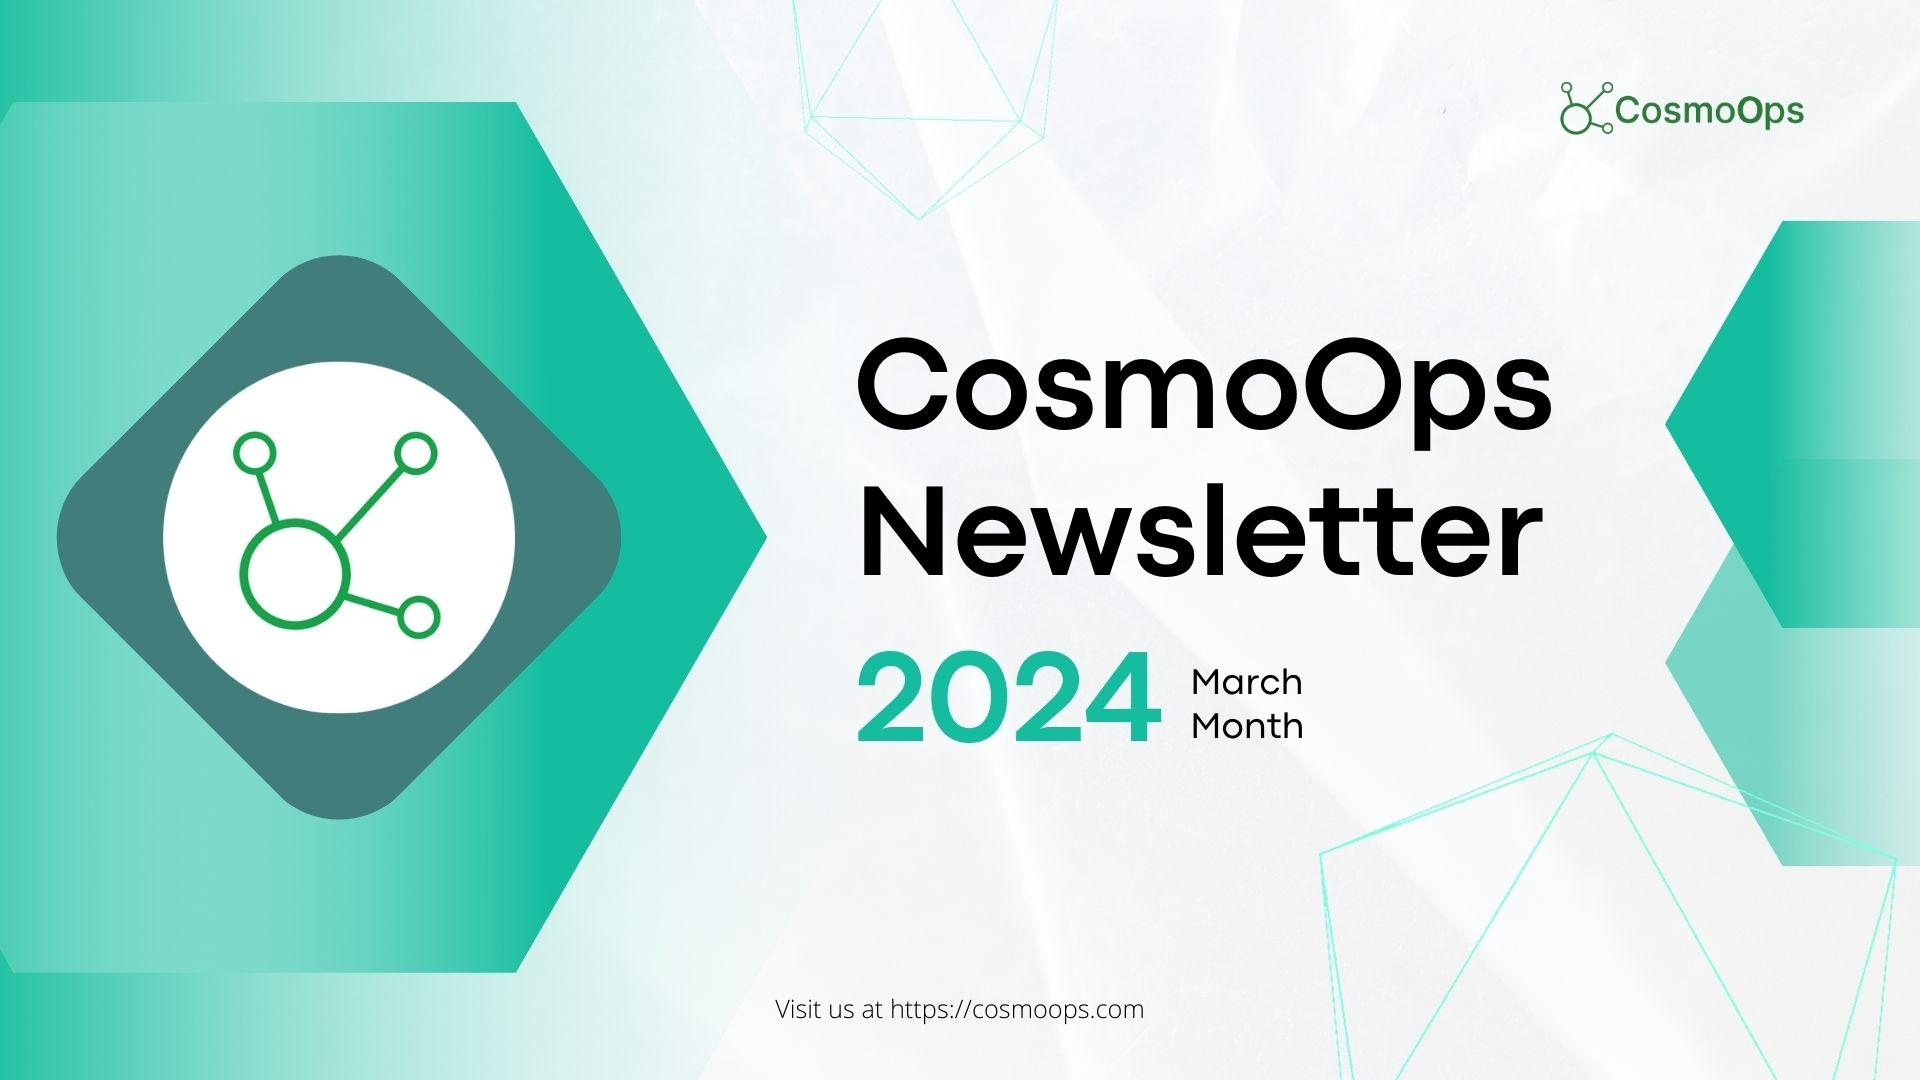 CosmoOps News: Stay Informed March Month!